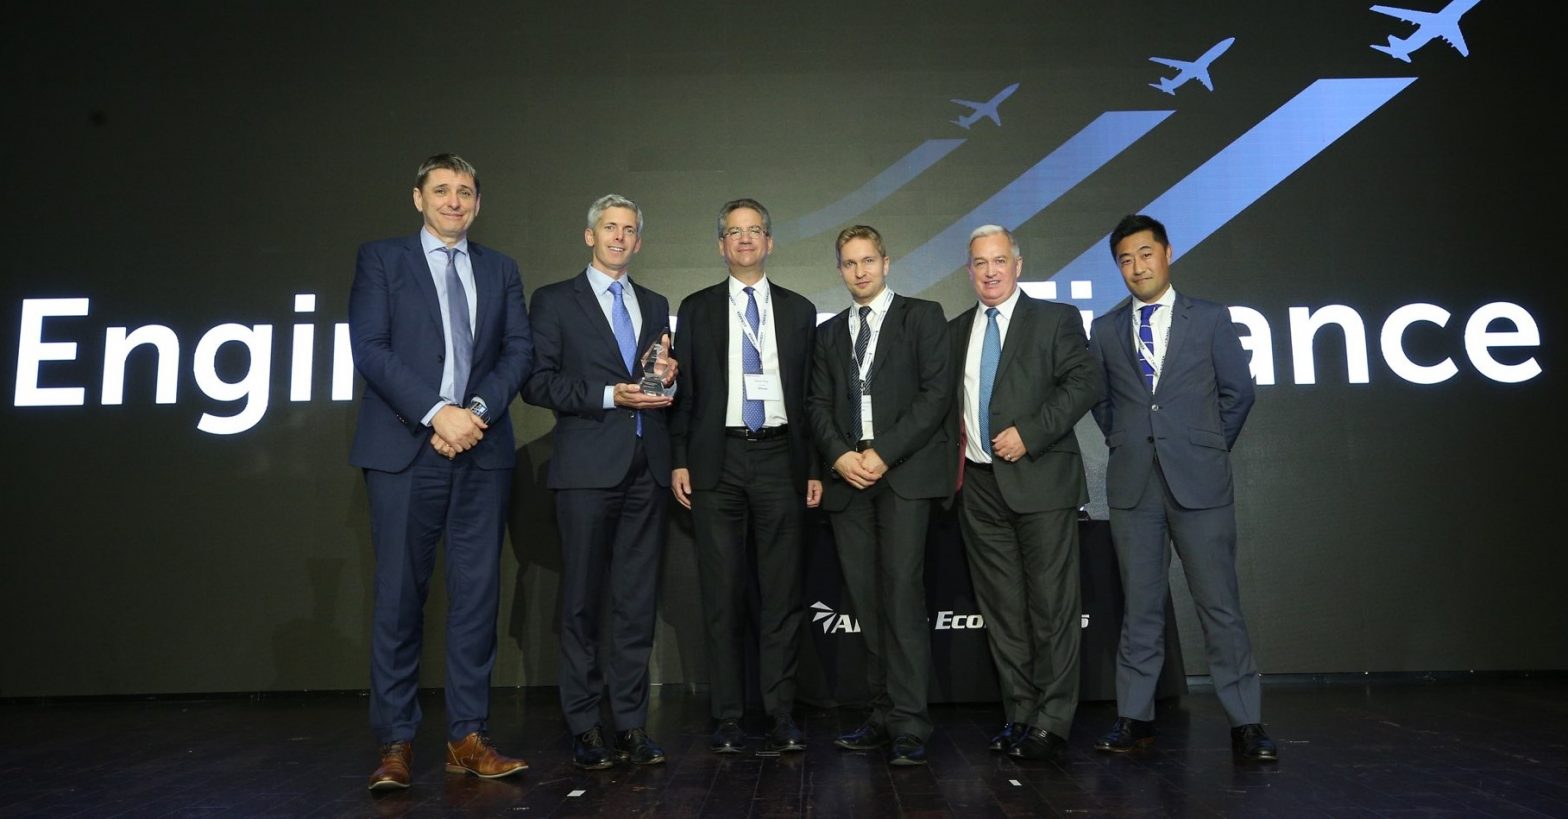 JOL Air-2019-01 wins the Asia Pacific Overall Deal Award - Stratos